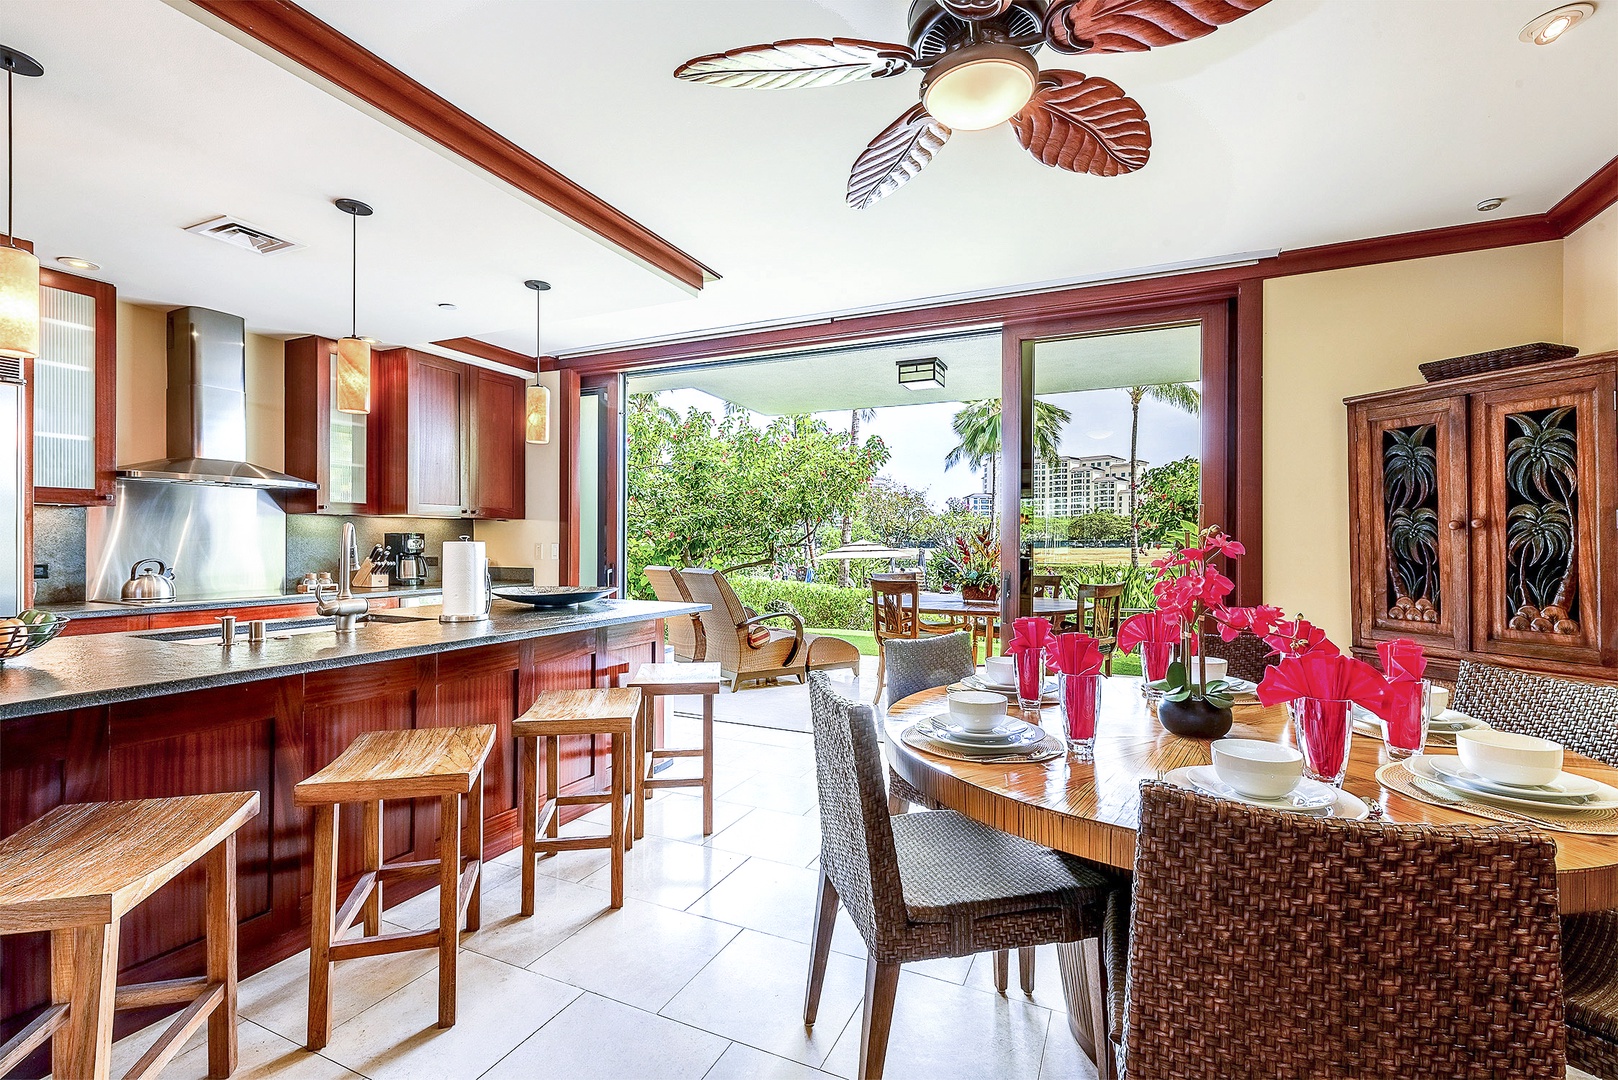 Kapolei Vacation Rentals, Ko Olina Beach Villas B107 - The dining areaa has the most incredible views and island breezes.